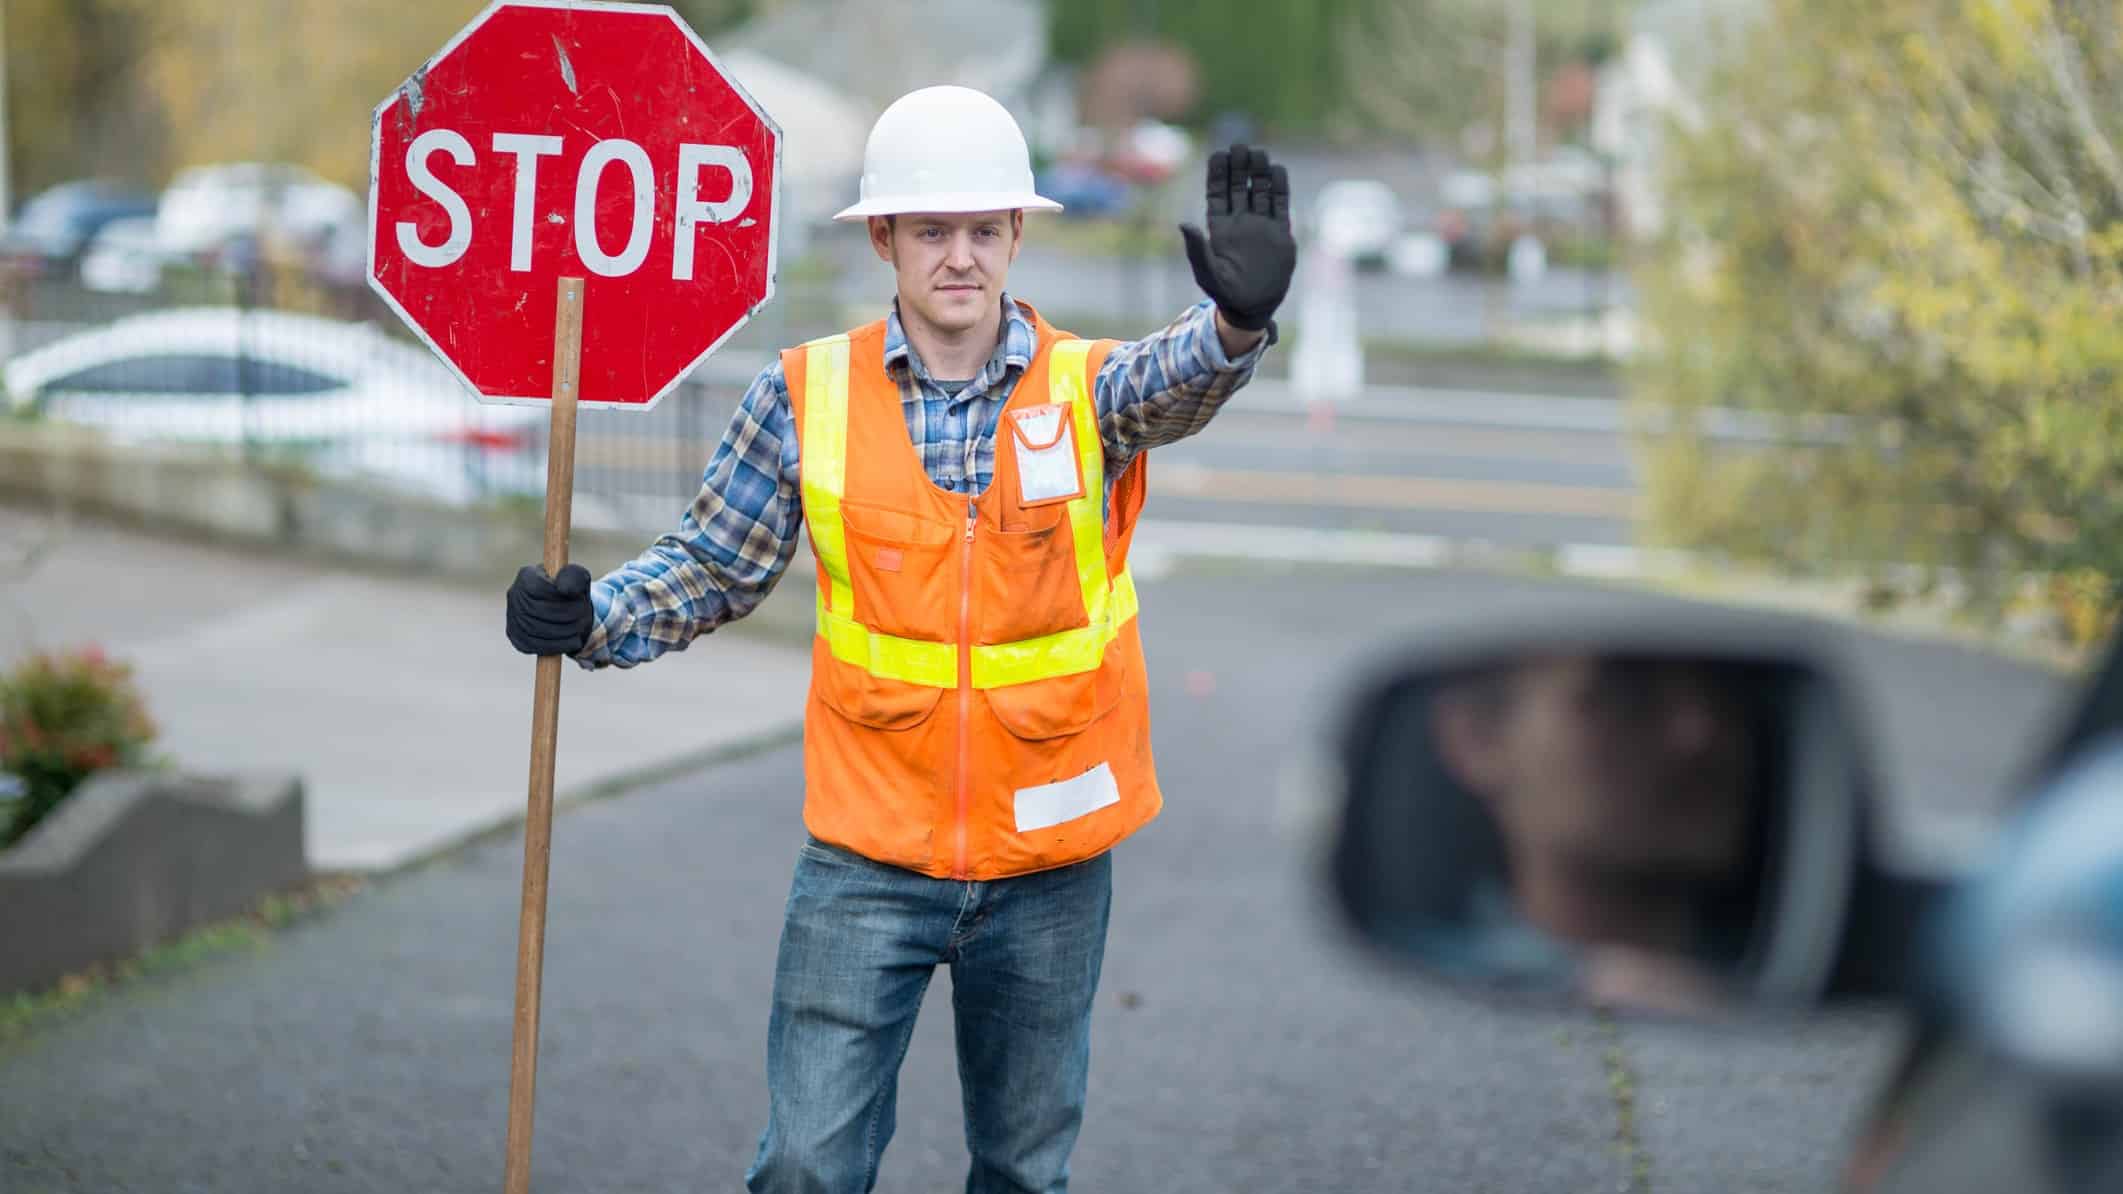 a man in a hard hat, high visibility vest and gloves holds a stop sign and holds up a hand in a halt gesture on a road.